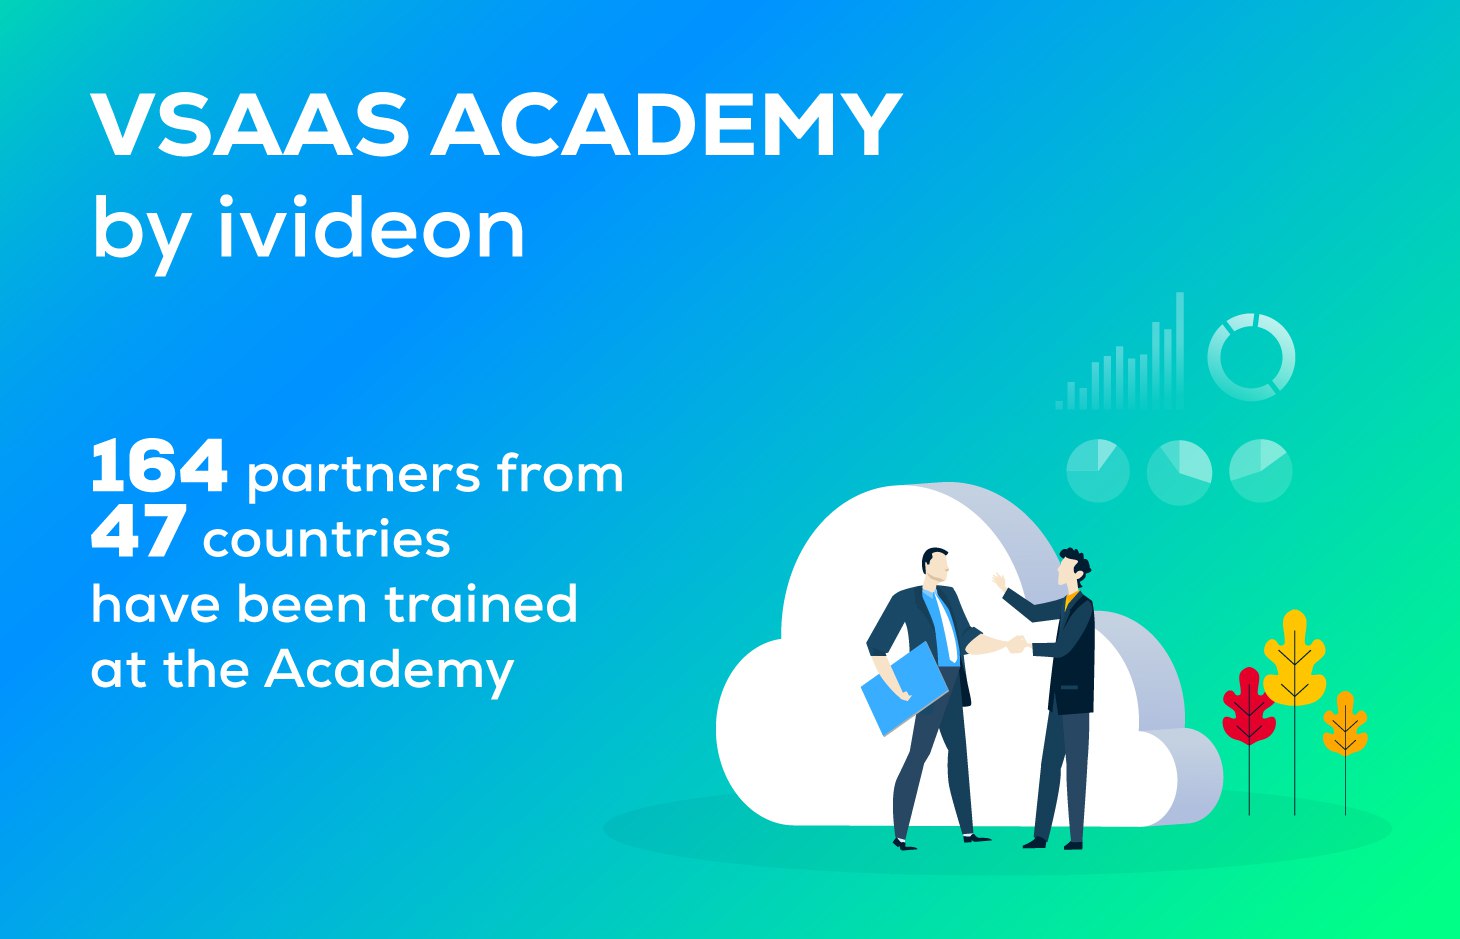 VSaaS Academy by Ivideon completed successfully